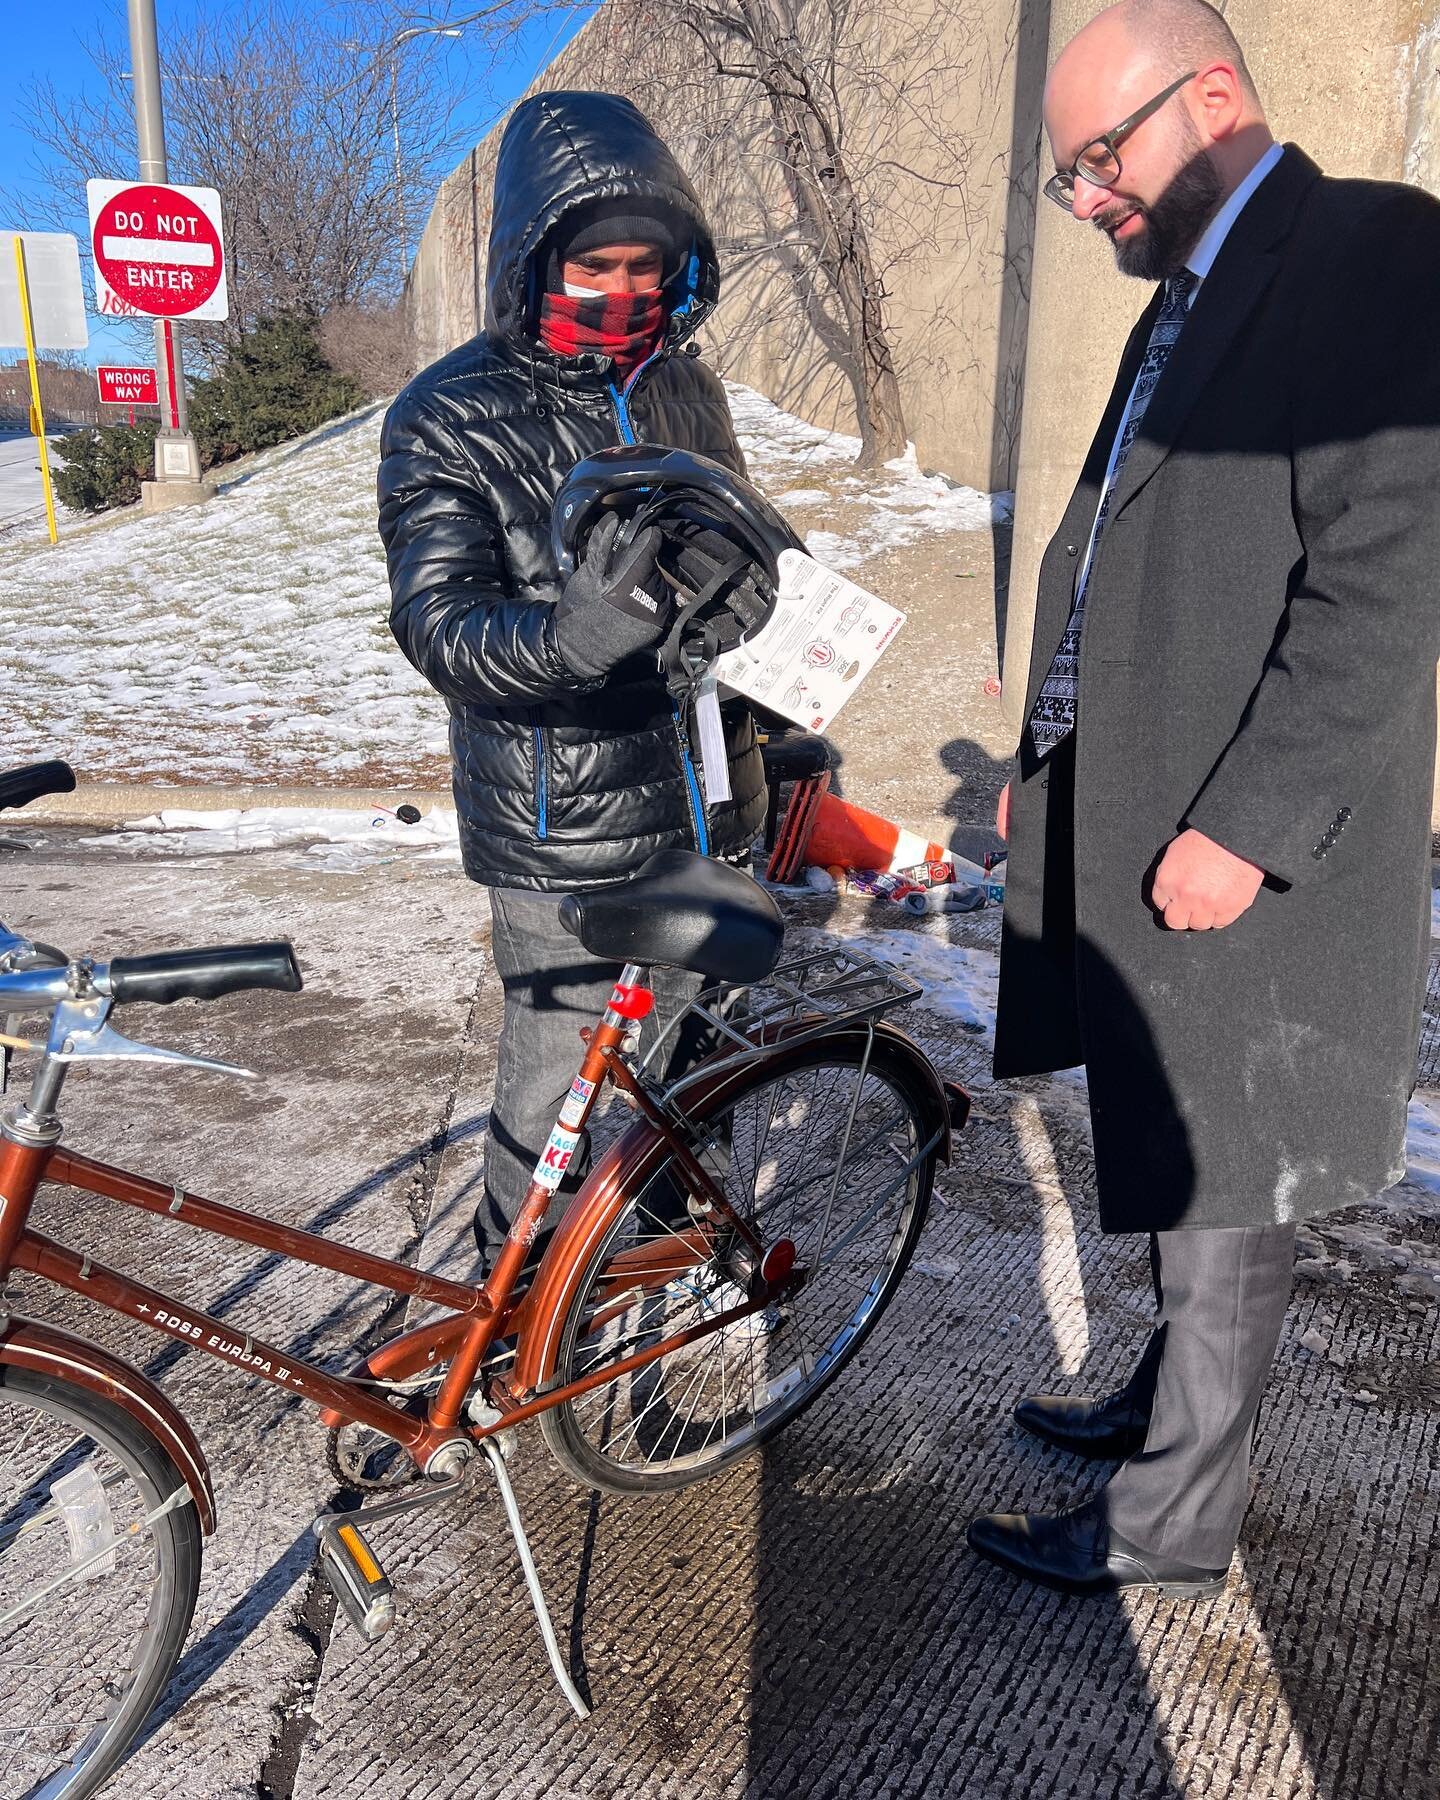 Merry Christmas to Alberto! He was ecstatic about having a old school bike souped up with a rack, lock, helmet and lights! Special thanks to Christina and Nick for befriending him, and checking up on him periodically and delivering the bike. Christ i